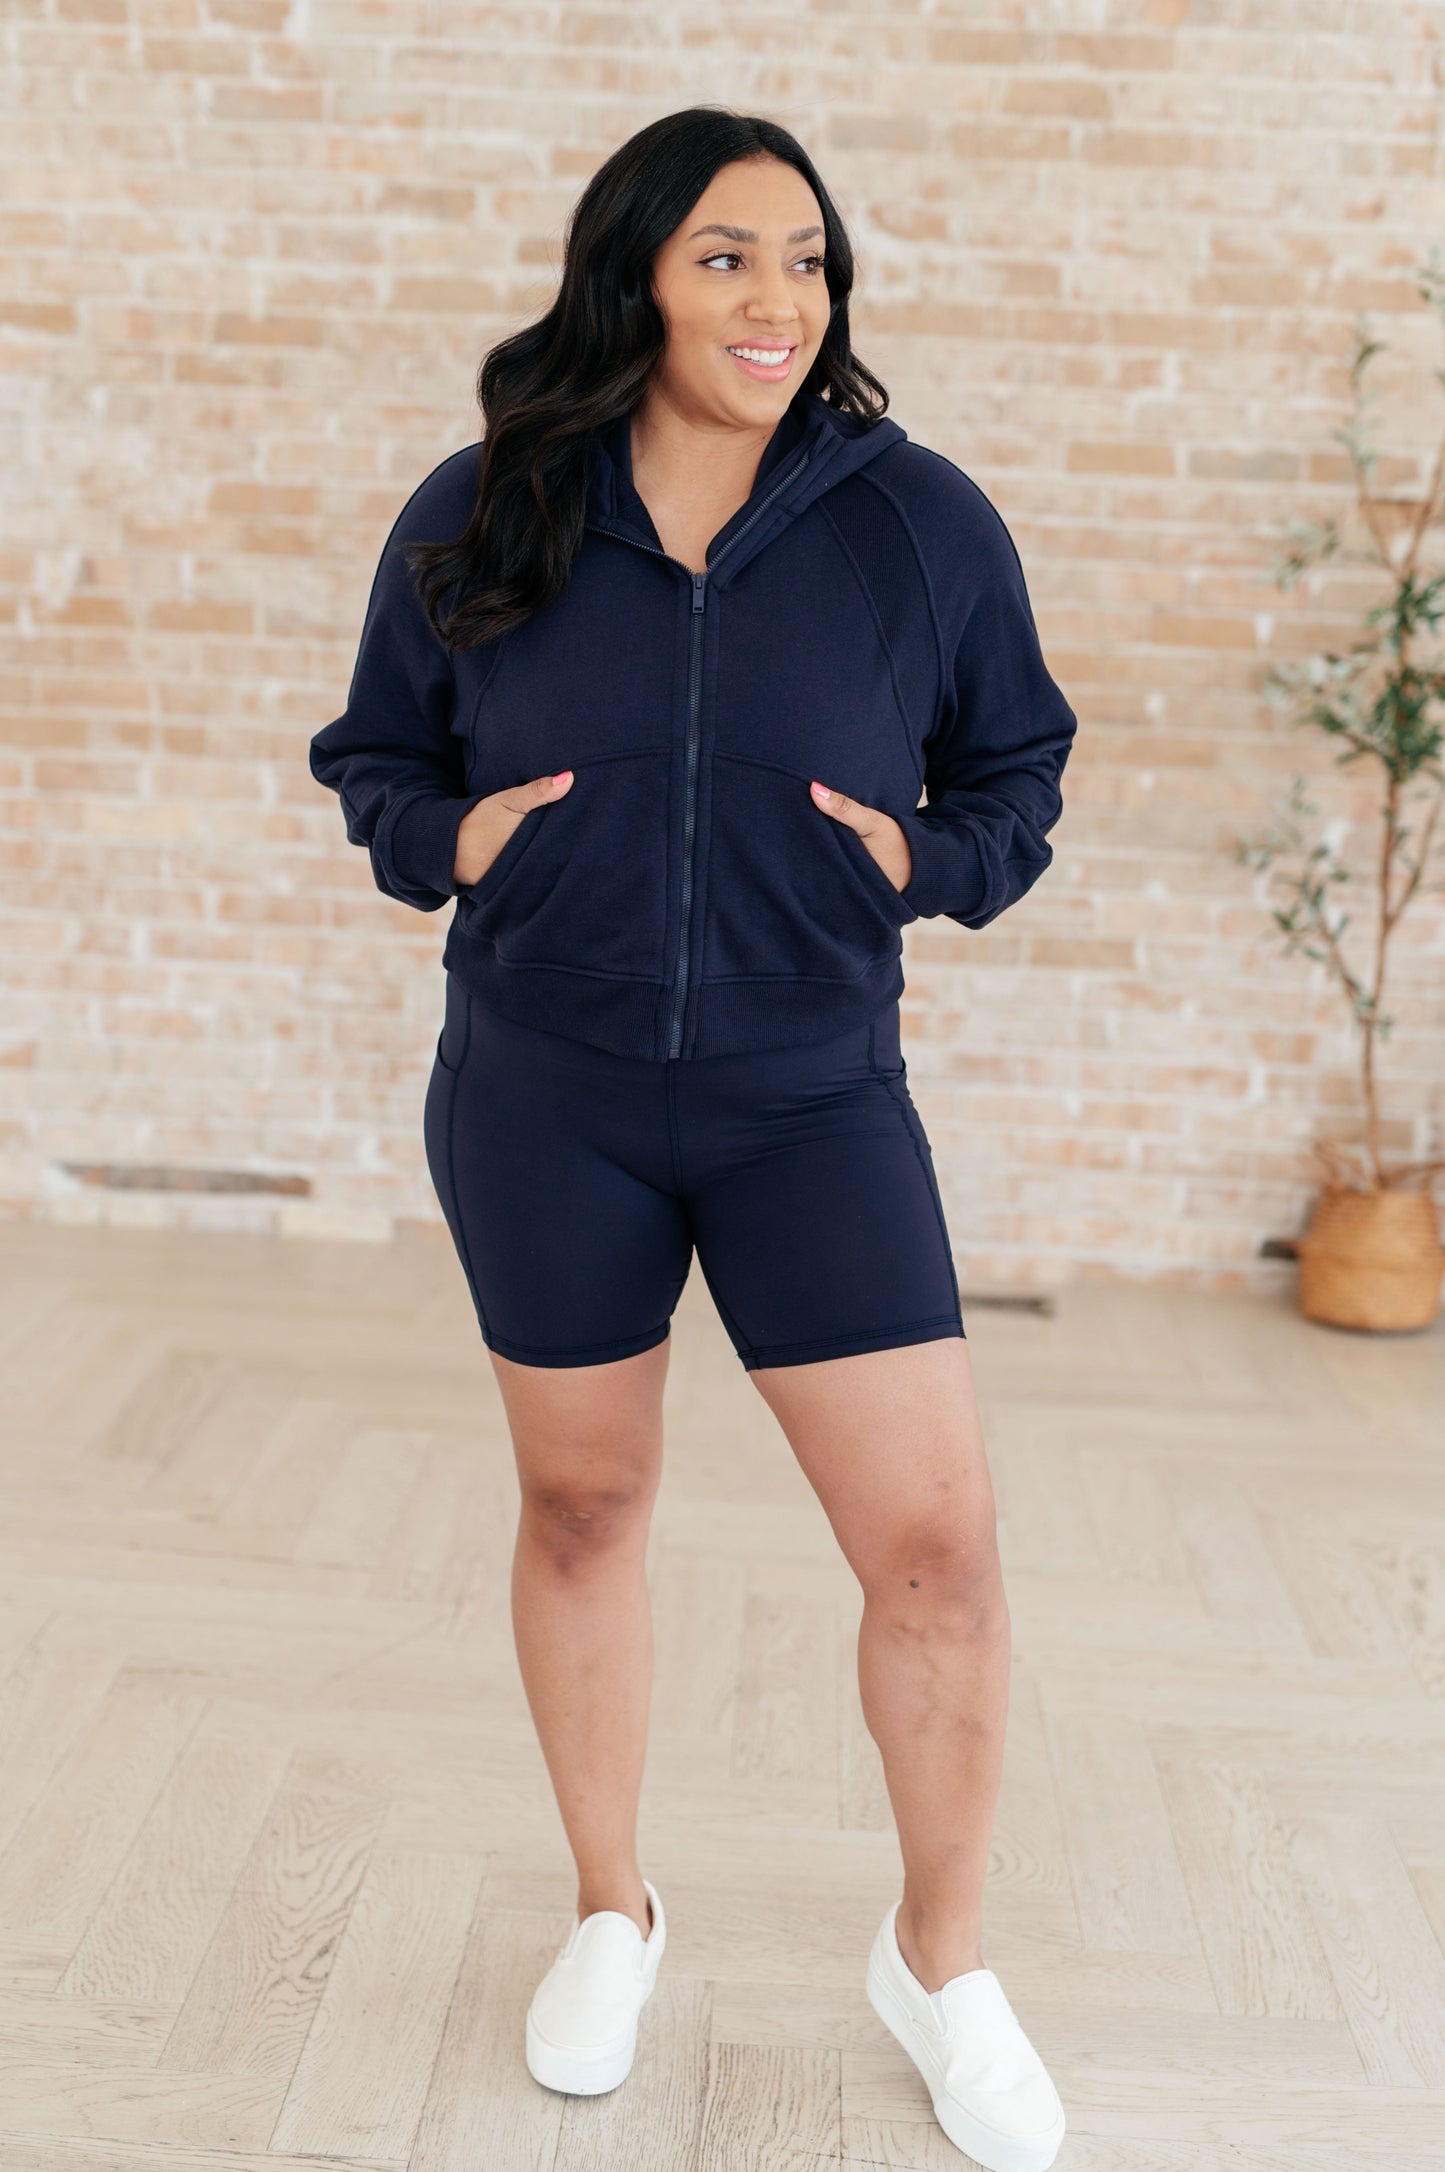 Sun or Shade Zip Up Jacket in Navy Ave Shops